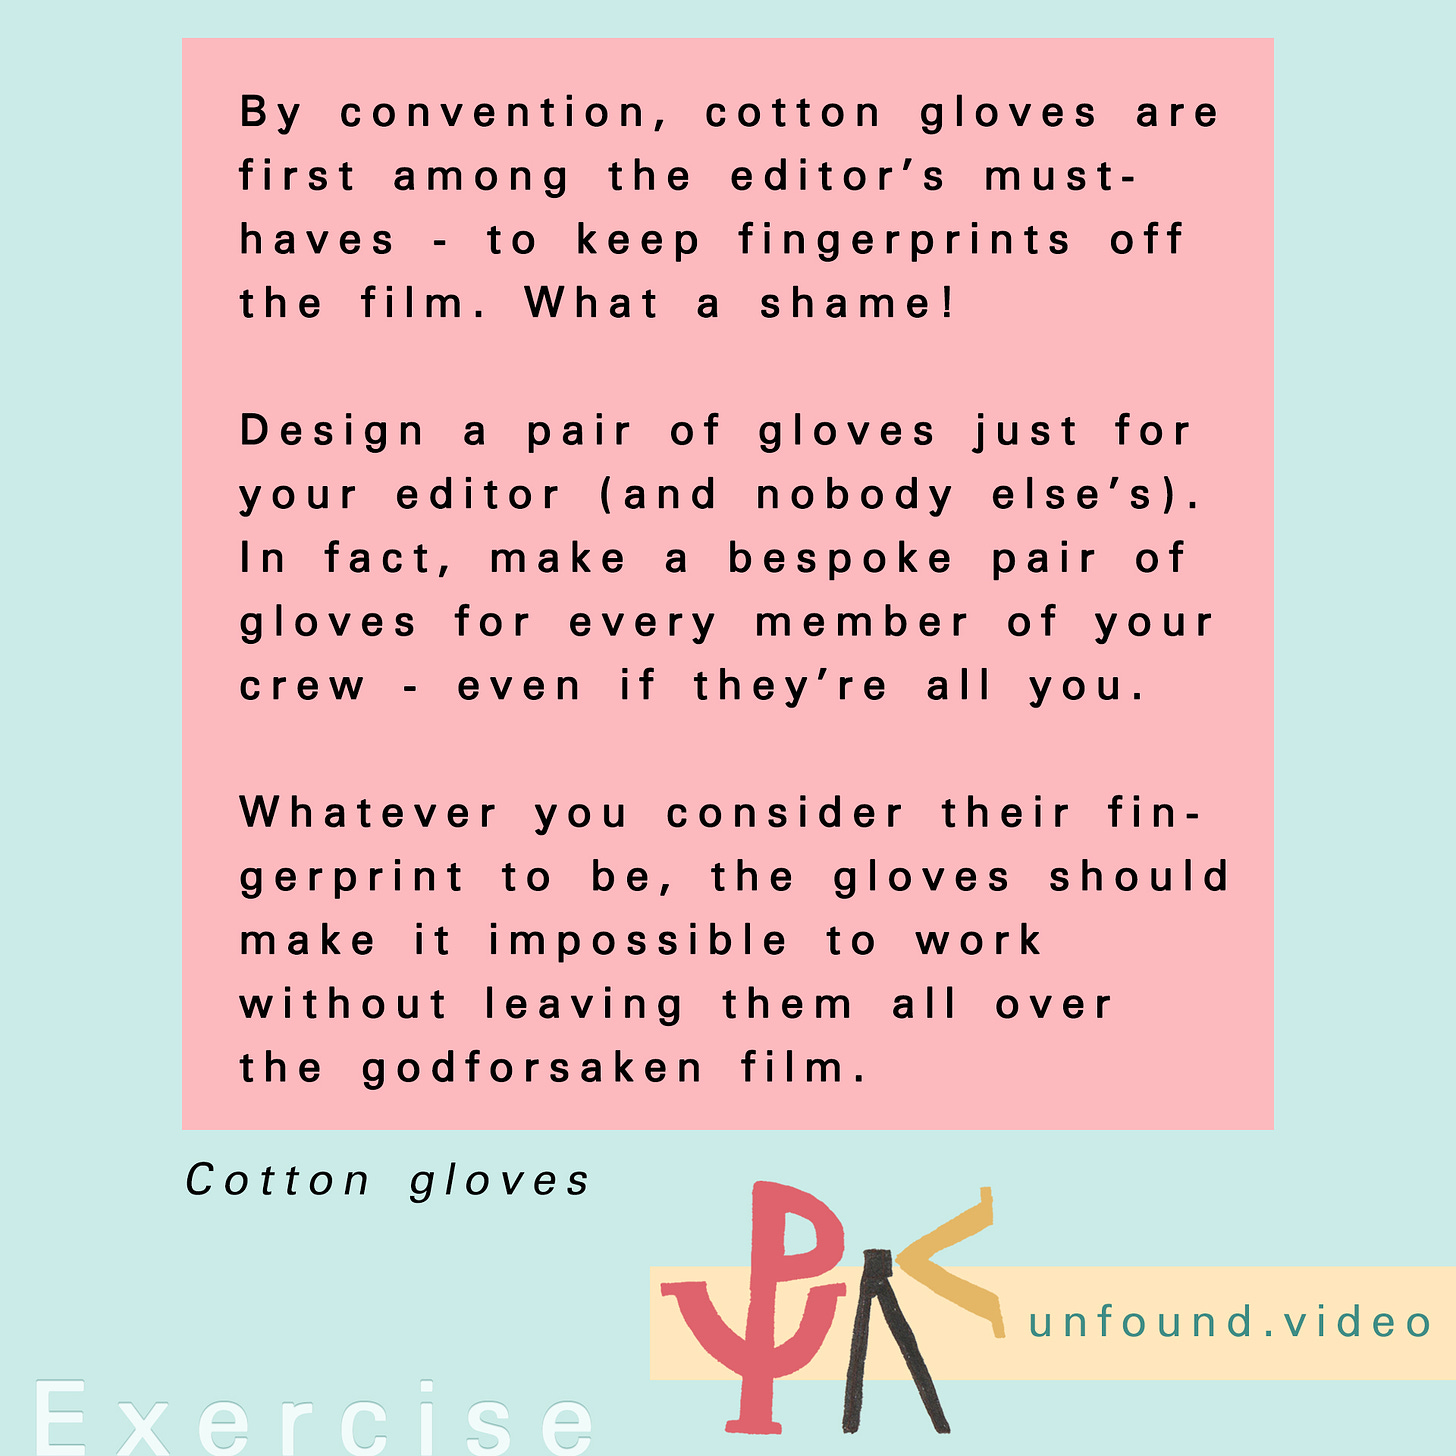 Text for an exercise called Cotton gloves. It reads: By convention, cotton gloves are first among the editor’s must- haves - to keep fingerprints off the film. What a shame!  Design a pair of gloves just for your editor (and nobody else’s). In fact, make a bespoke pair of gloves for every member of your crew - even if they’re all you.  Whatever you consider their fingerprint to be, the gloves should make it impossible to work without leaving them all over the godforsaken film.